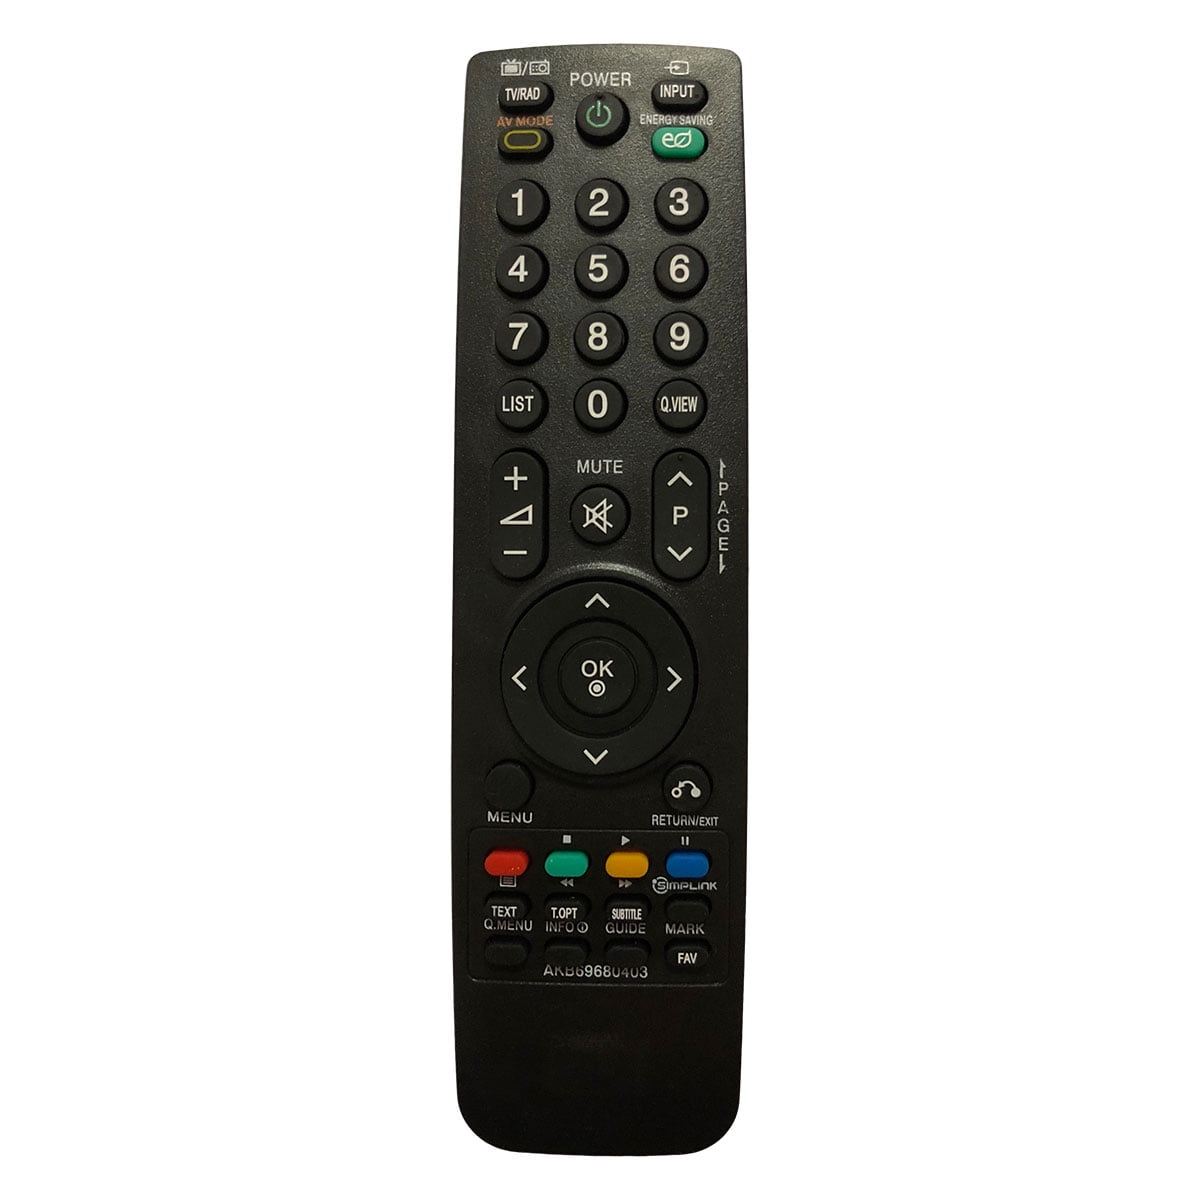 DEHA TV Remote Control for LG 37LH2000 Television